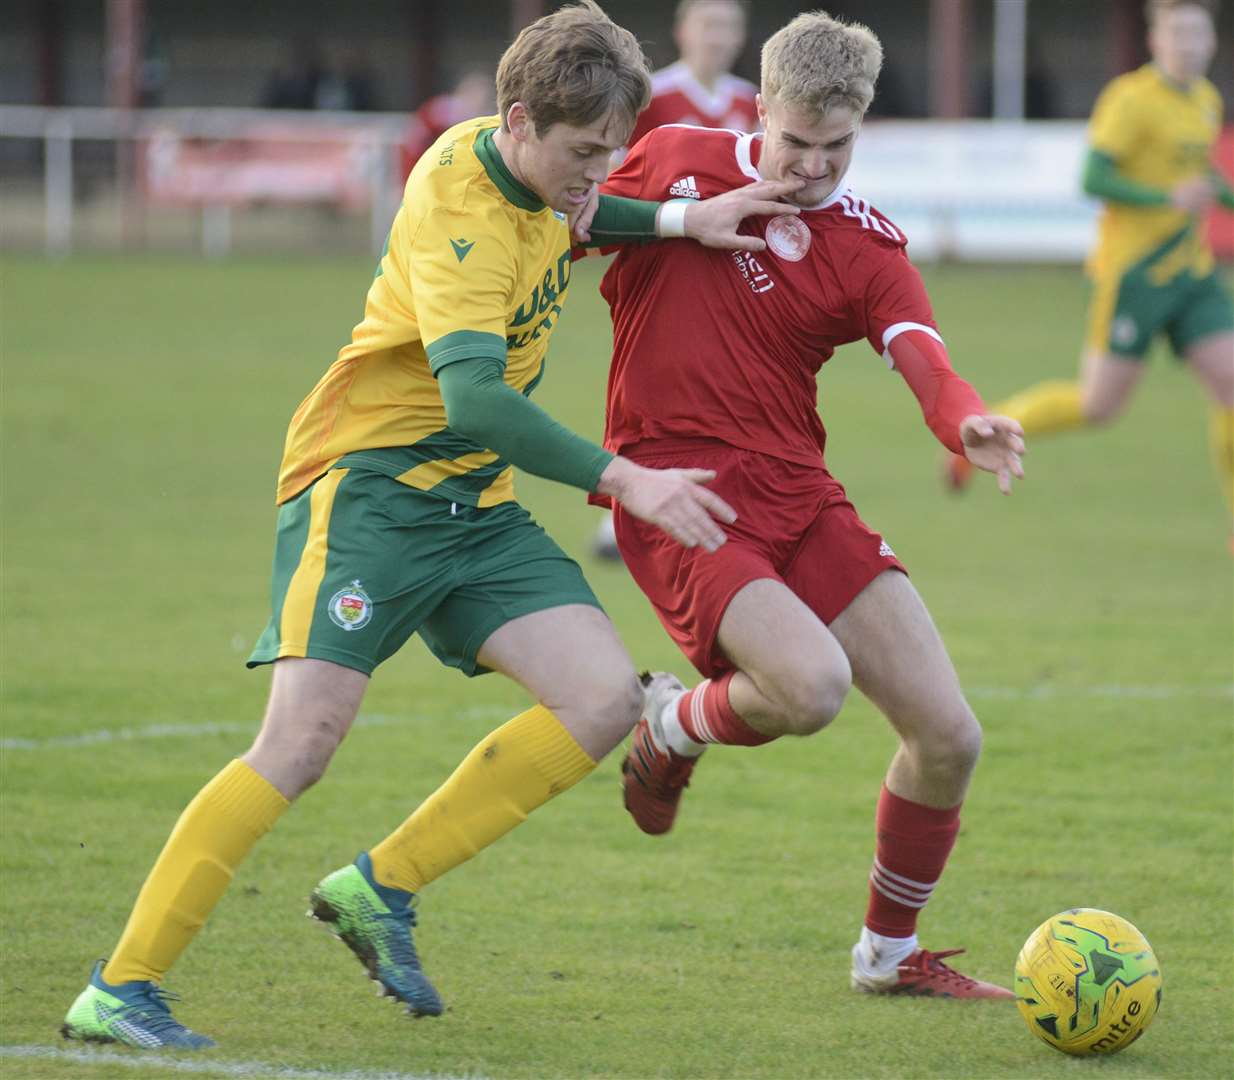 Ashford's Tom O'Connor, left, battles for possession against Hythe Picture: Paul Amos